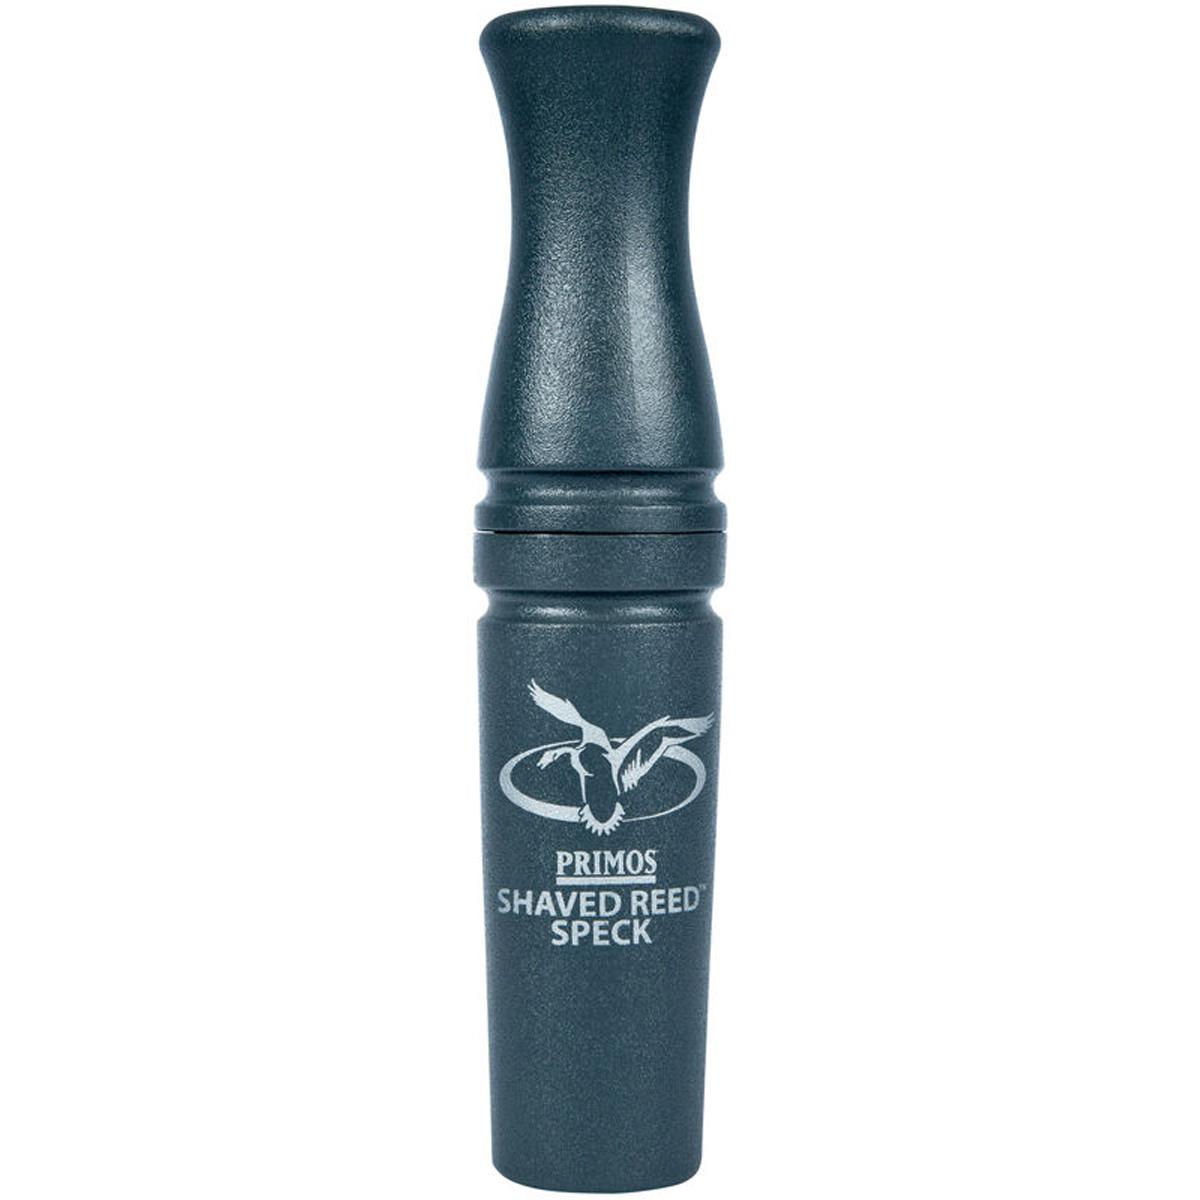 Image of Bushnell Shaved Reed Speck Goose Call